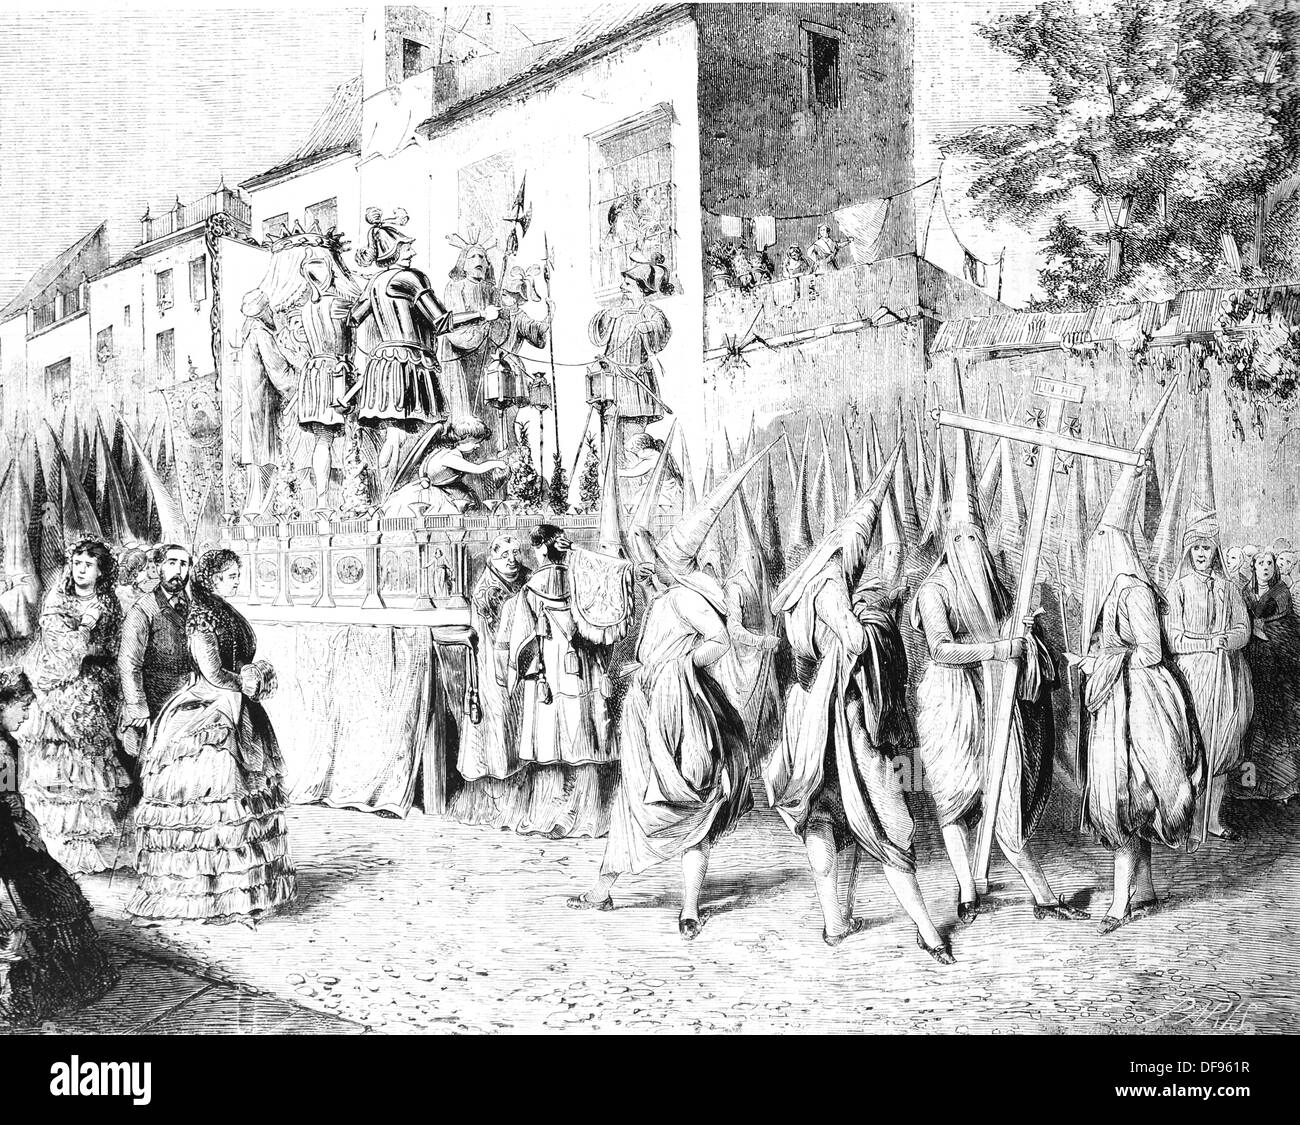 Spain. Andalusia. Holly Week in Seville. Procession of passos. Engraving. 19th century. Stock Photo